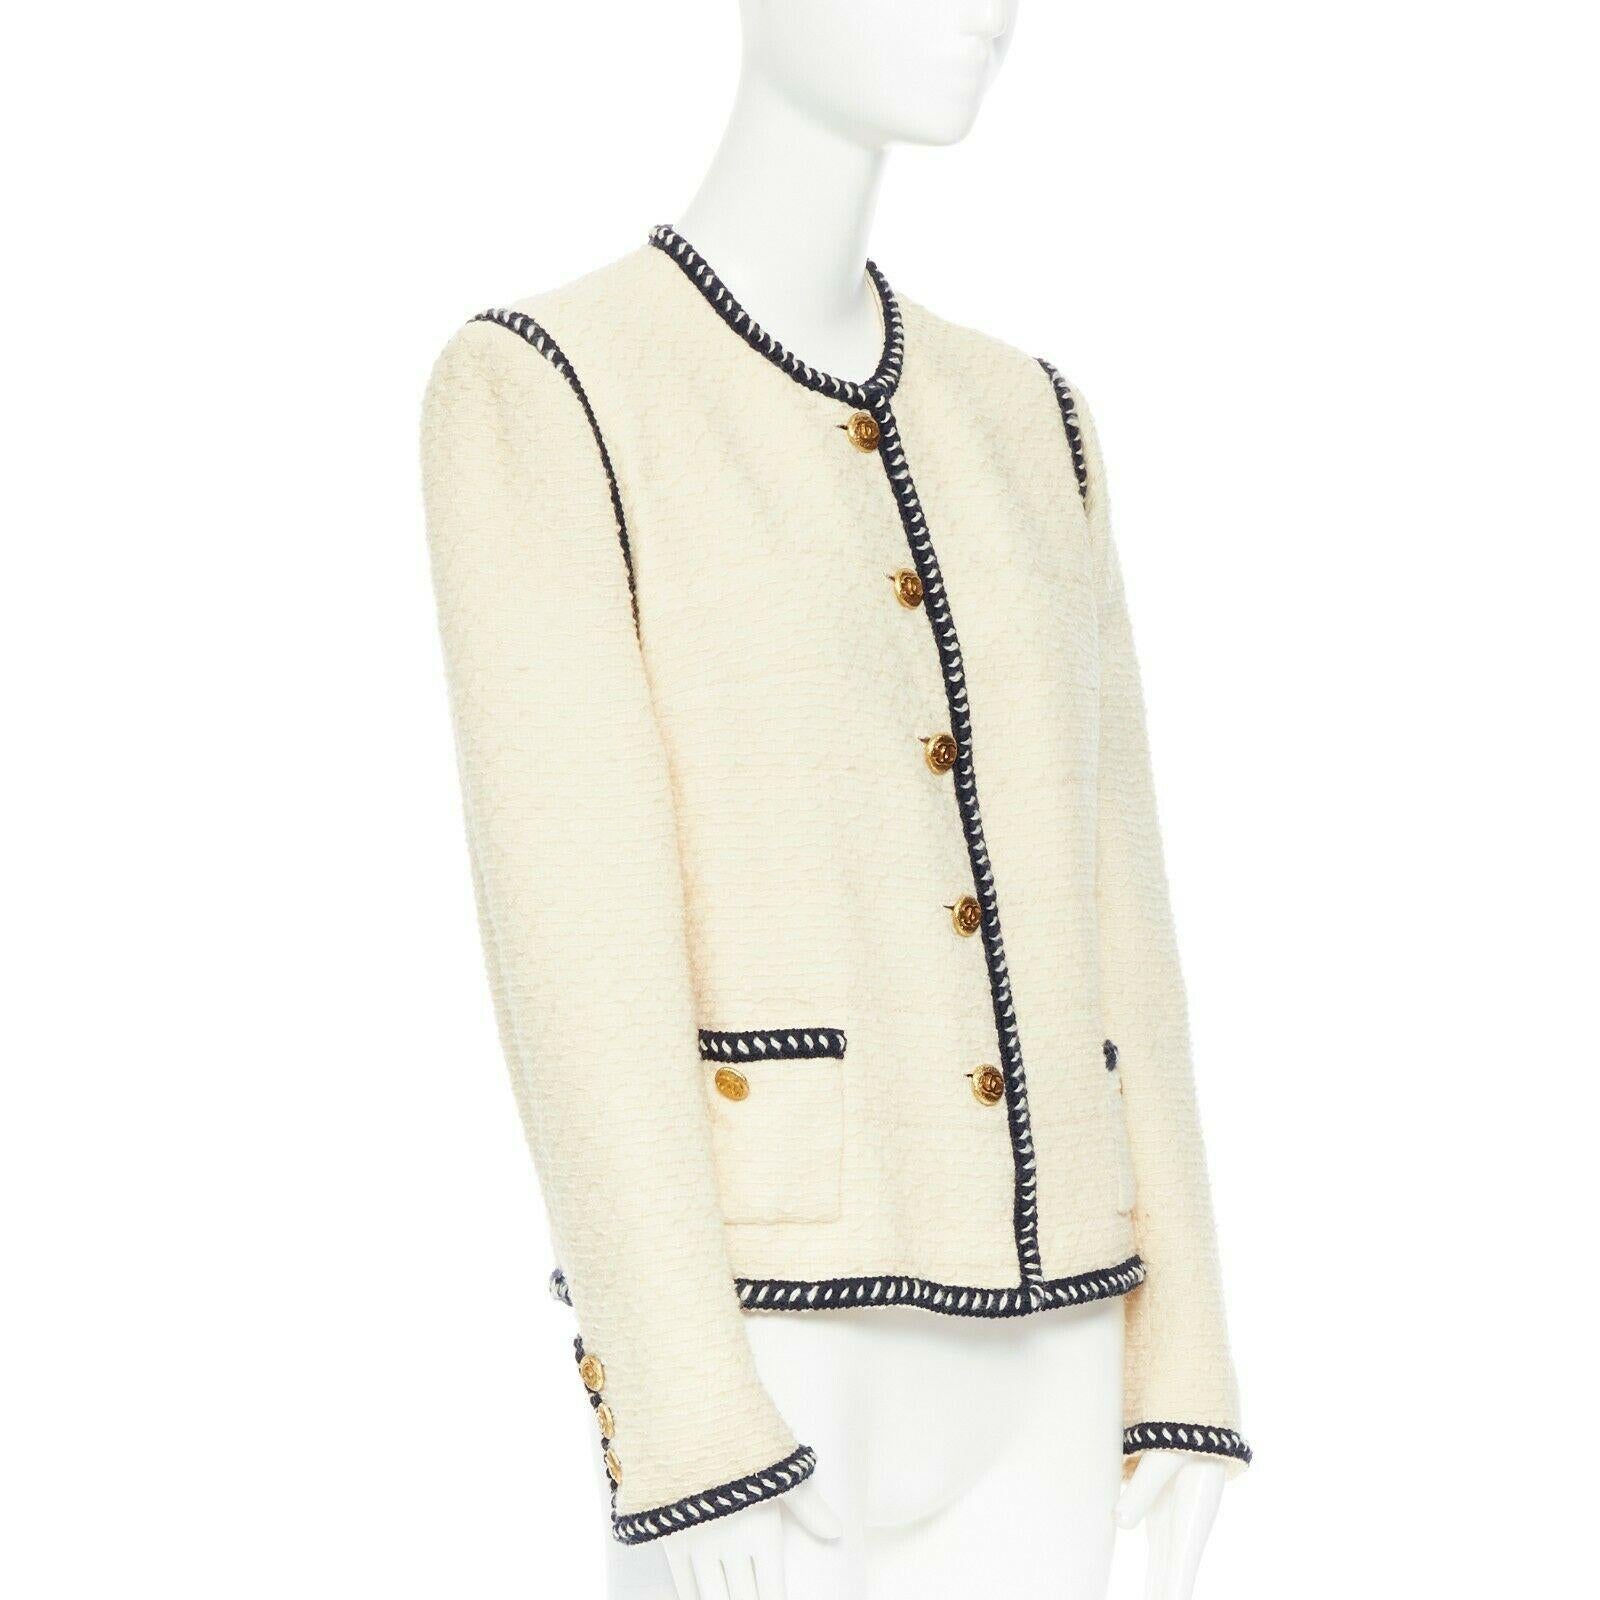 CHANEL 80s vintage ecru tweed navy braid trim gold CC button collarless jacket
Brand: CHANEL
Designer: Karl Lagerfeld
Collection: circa 1980s
Model Name / Style: Tweed jacket
Material: Other; composition label removed. Feels like wool.
Color: